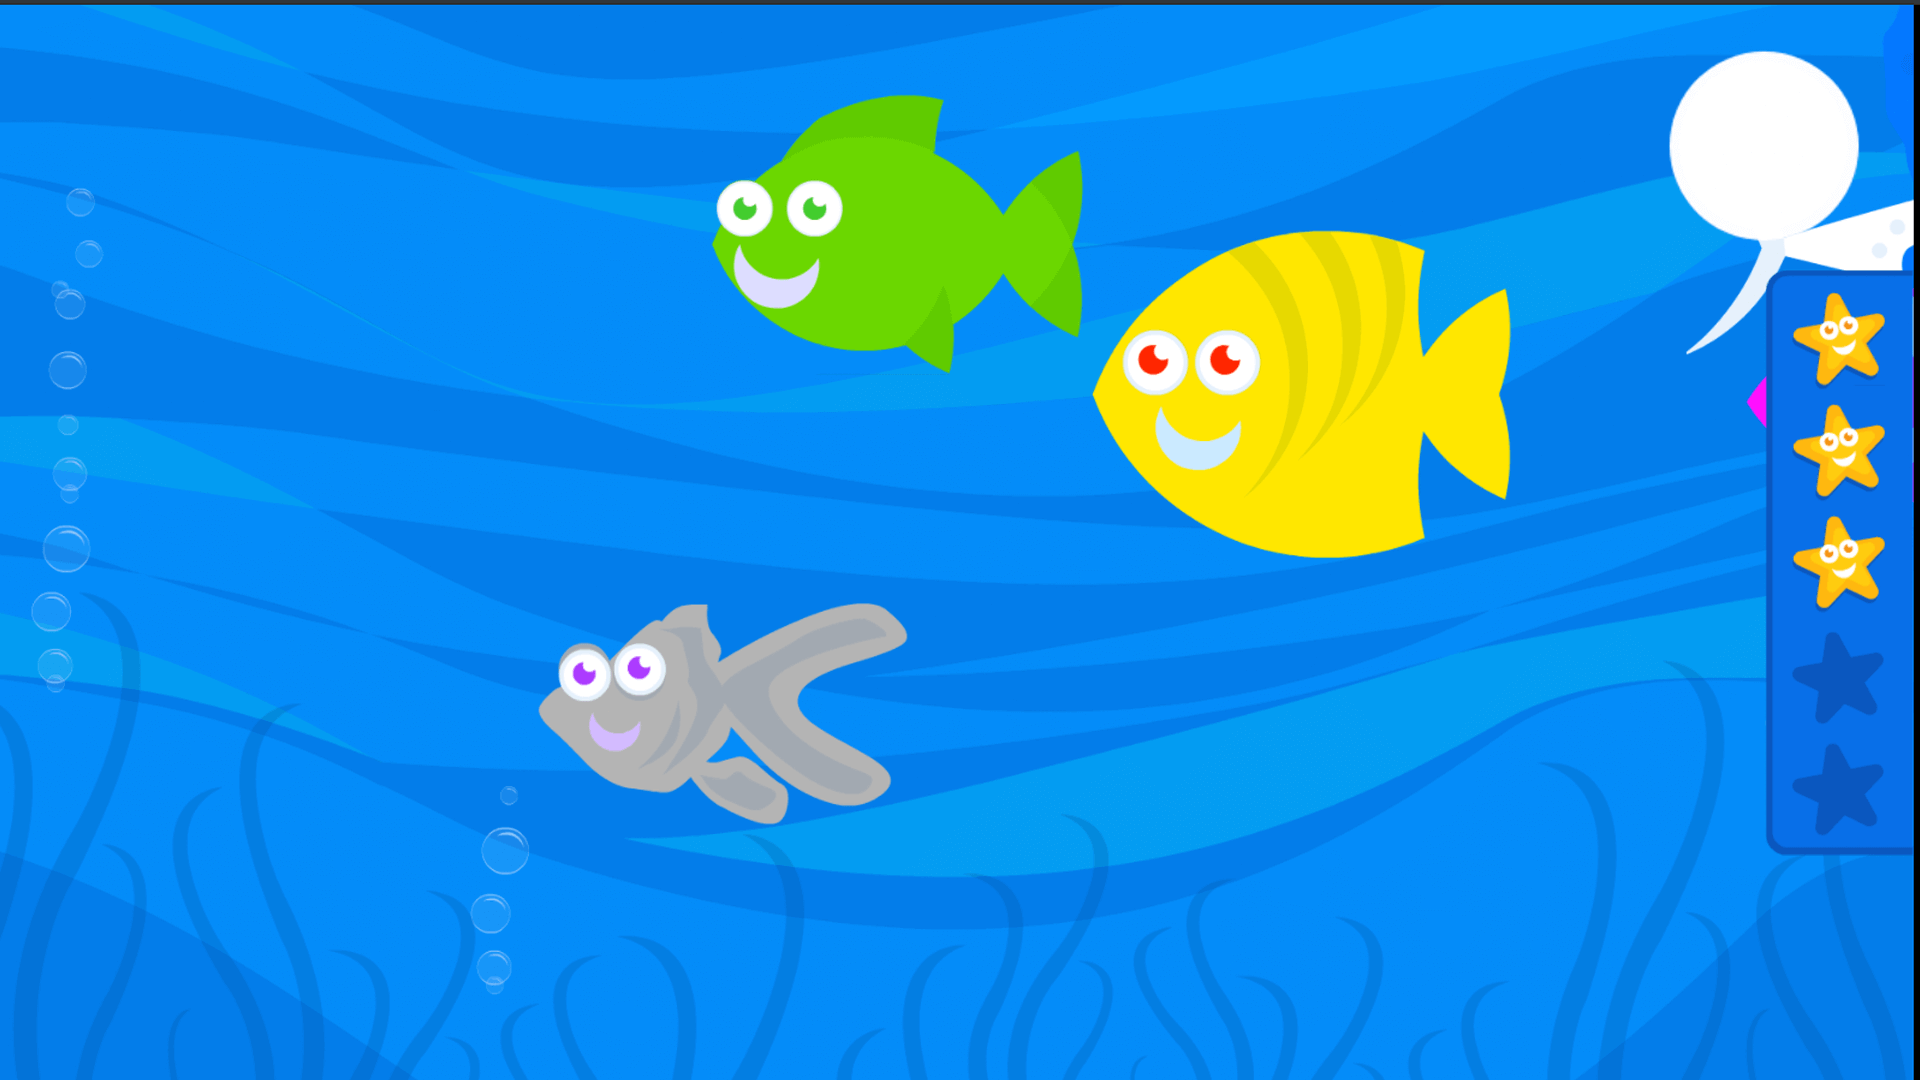 learn colors, identify colors, fish game﻿﻿